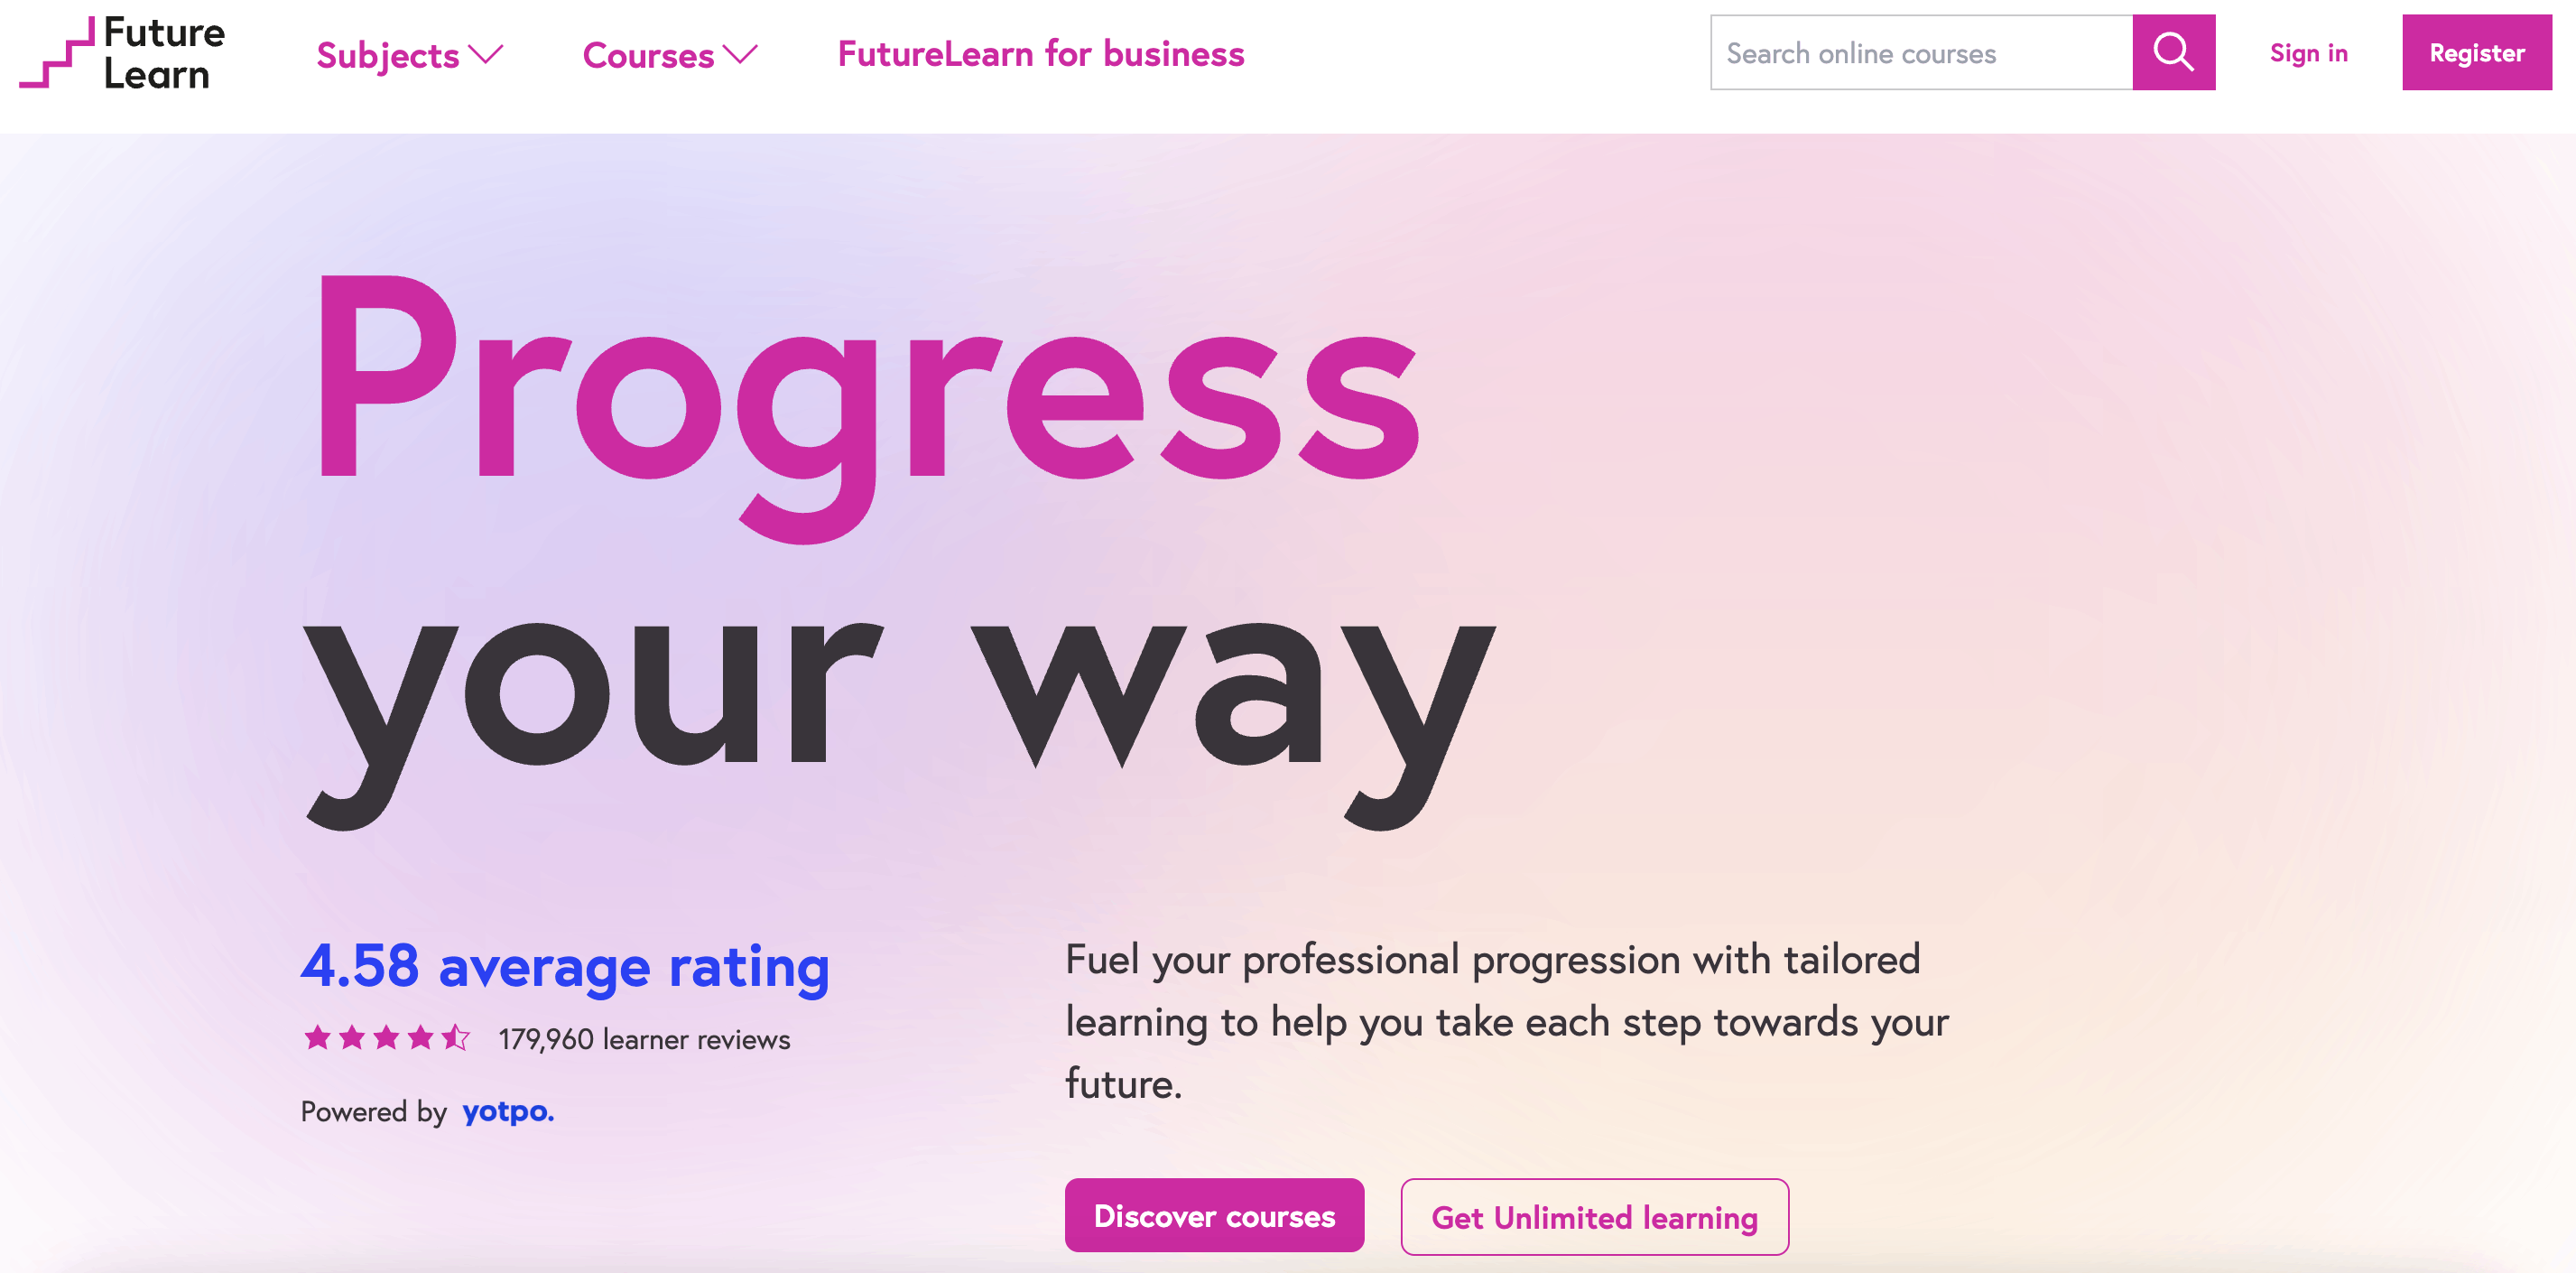 Go to the official website of FutureLearn